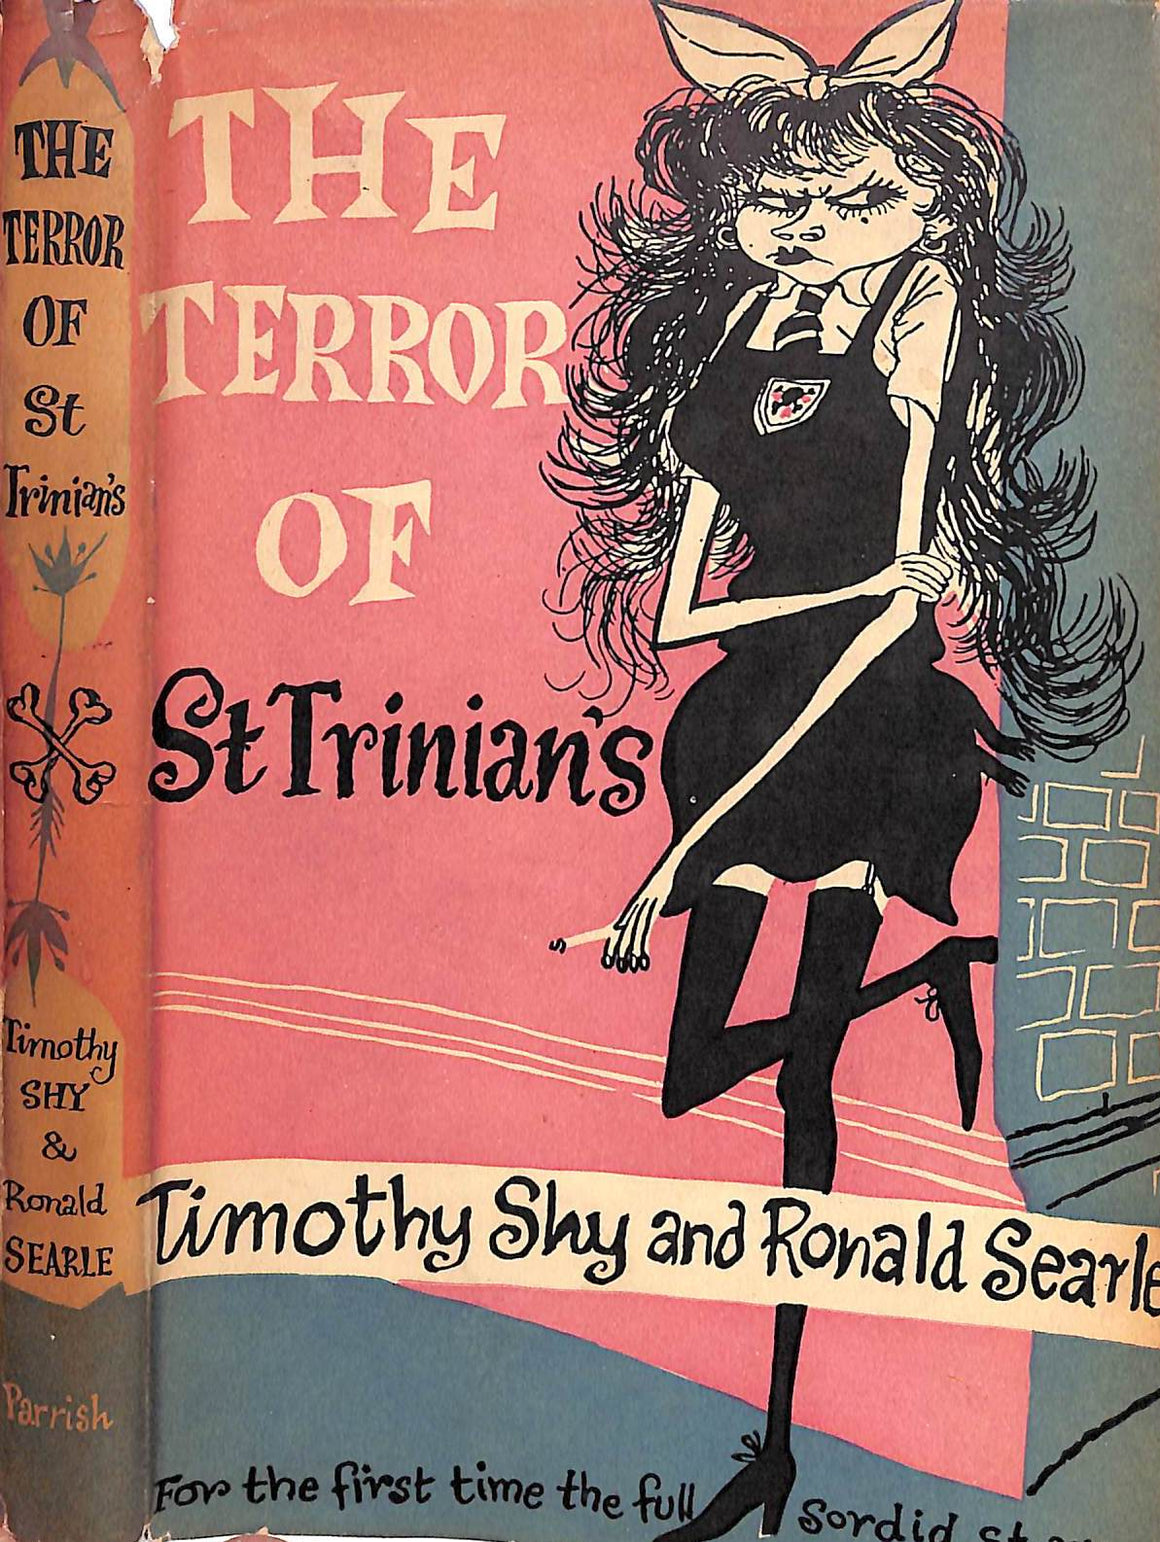 "The Terror Of St Trinian's" 1952 SHY, Timothy and SEARLE, Ronald